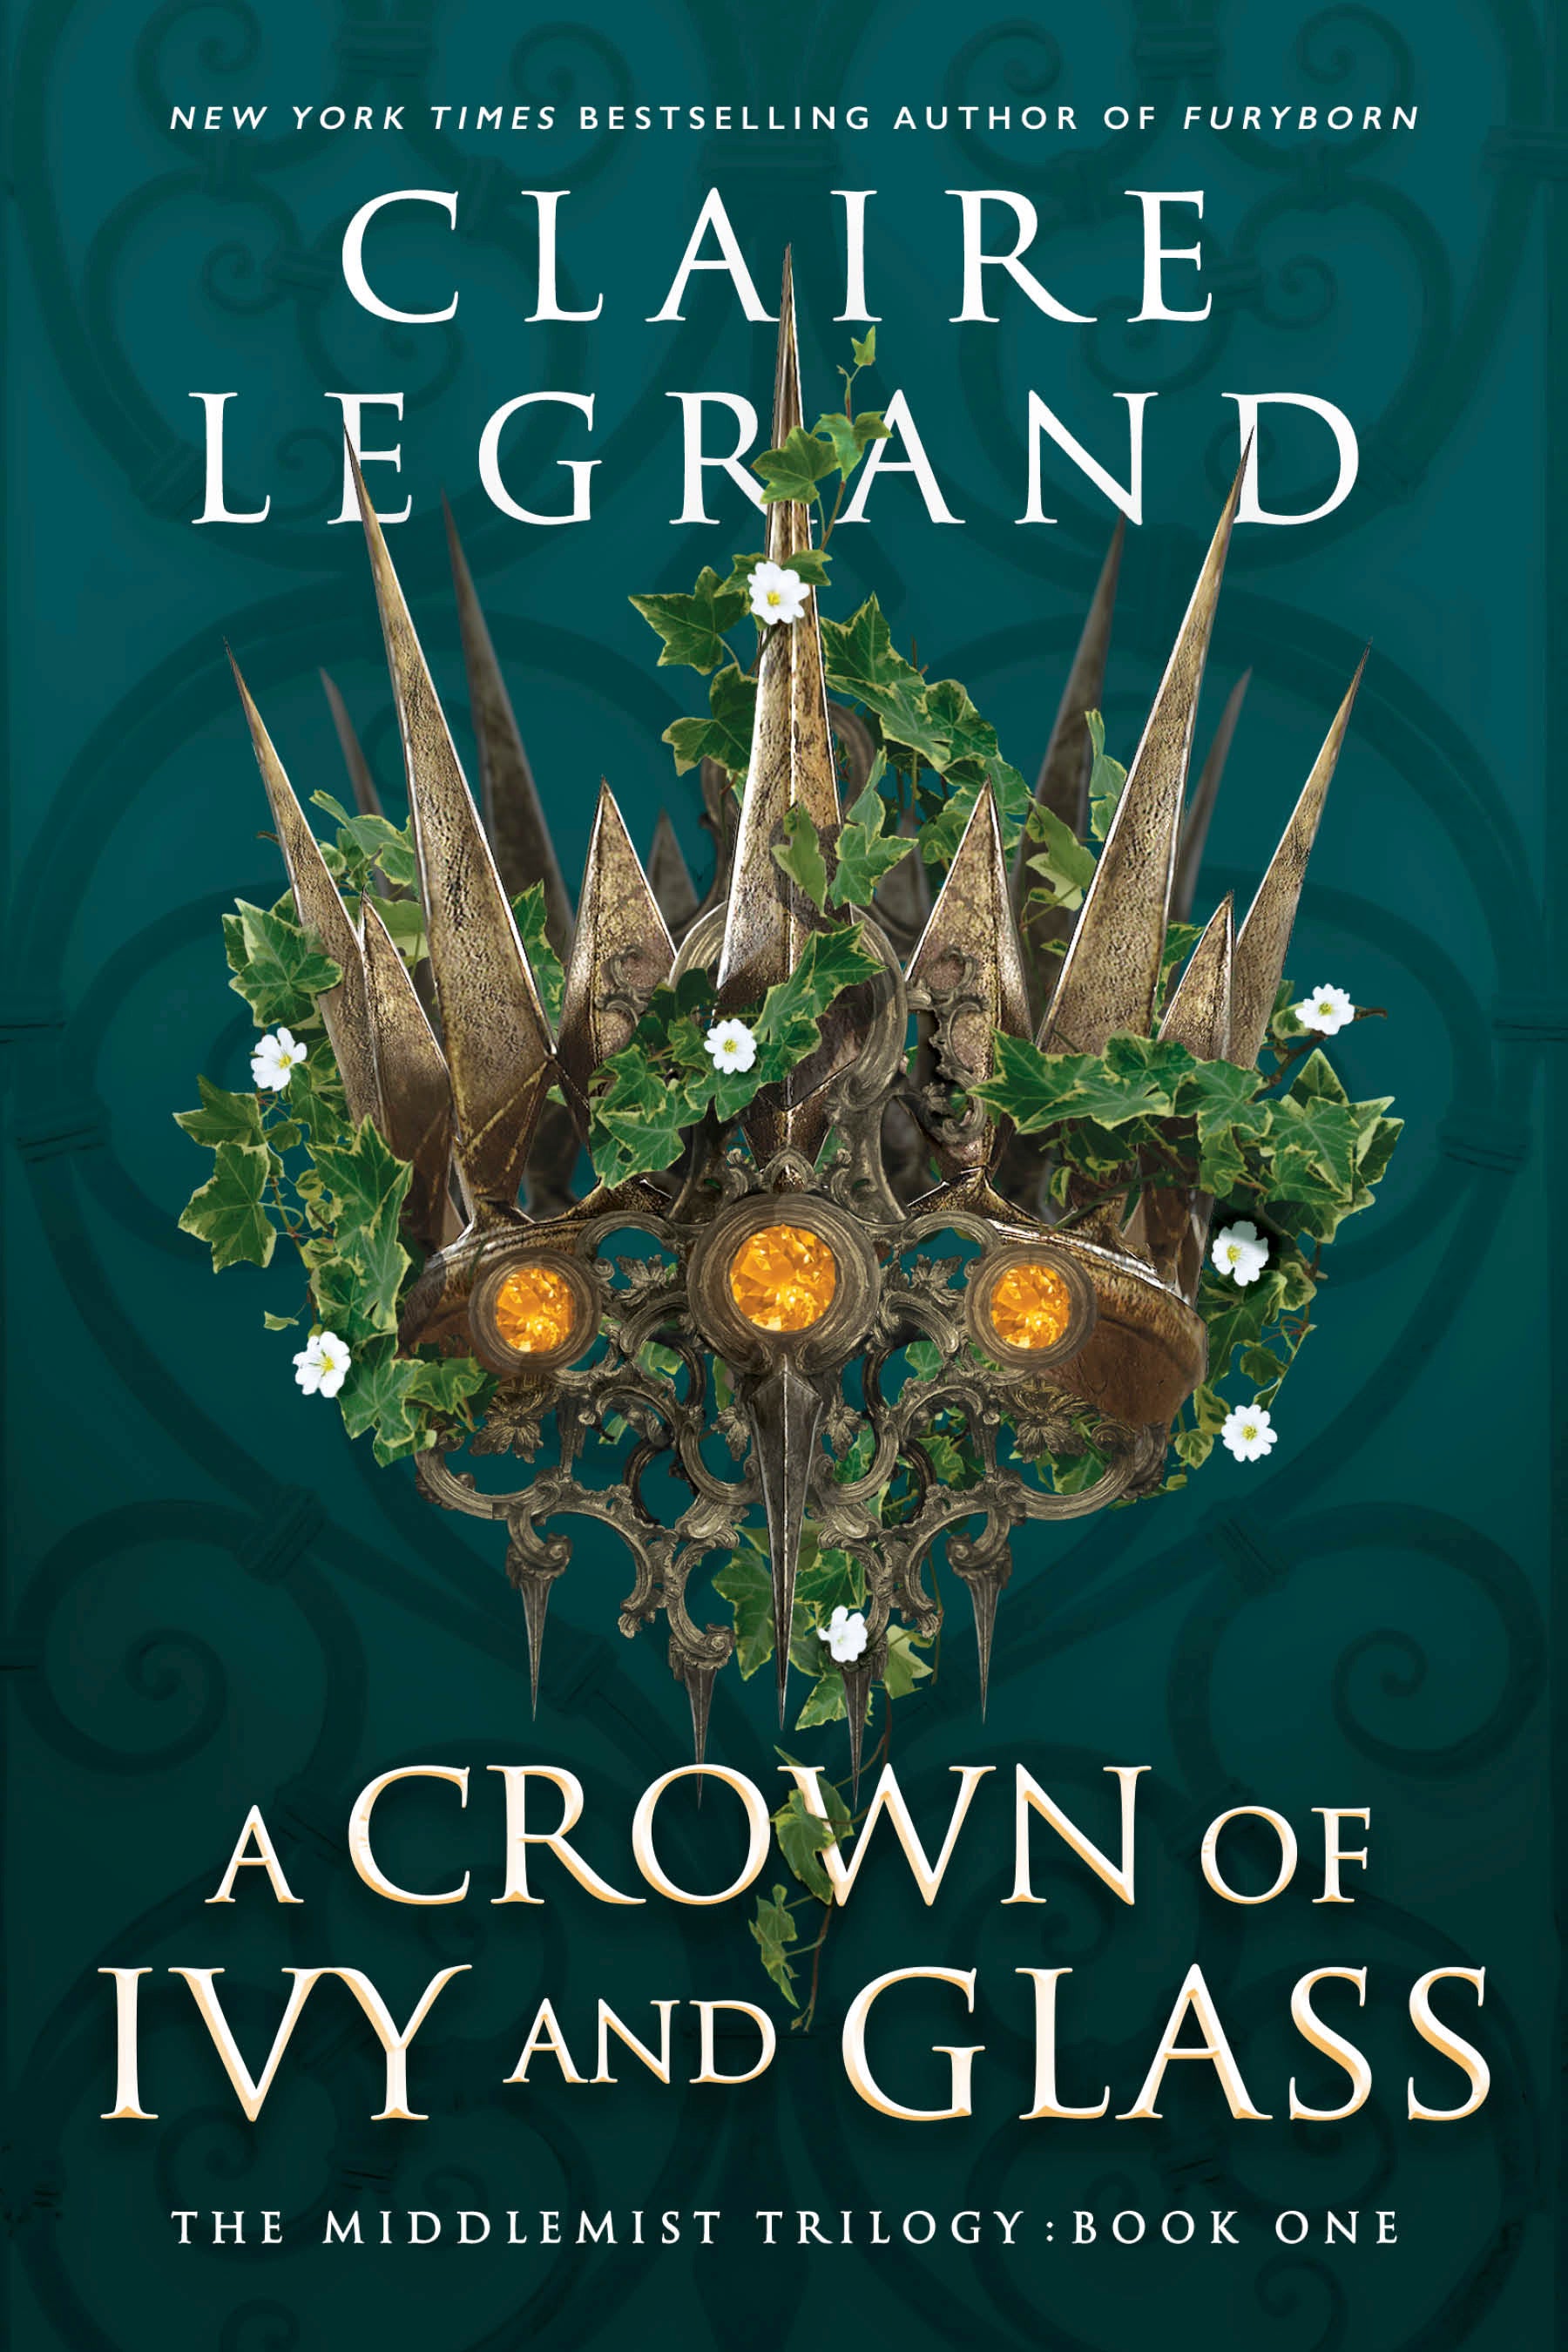 Book Review - A Crown of Ivy and Glass